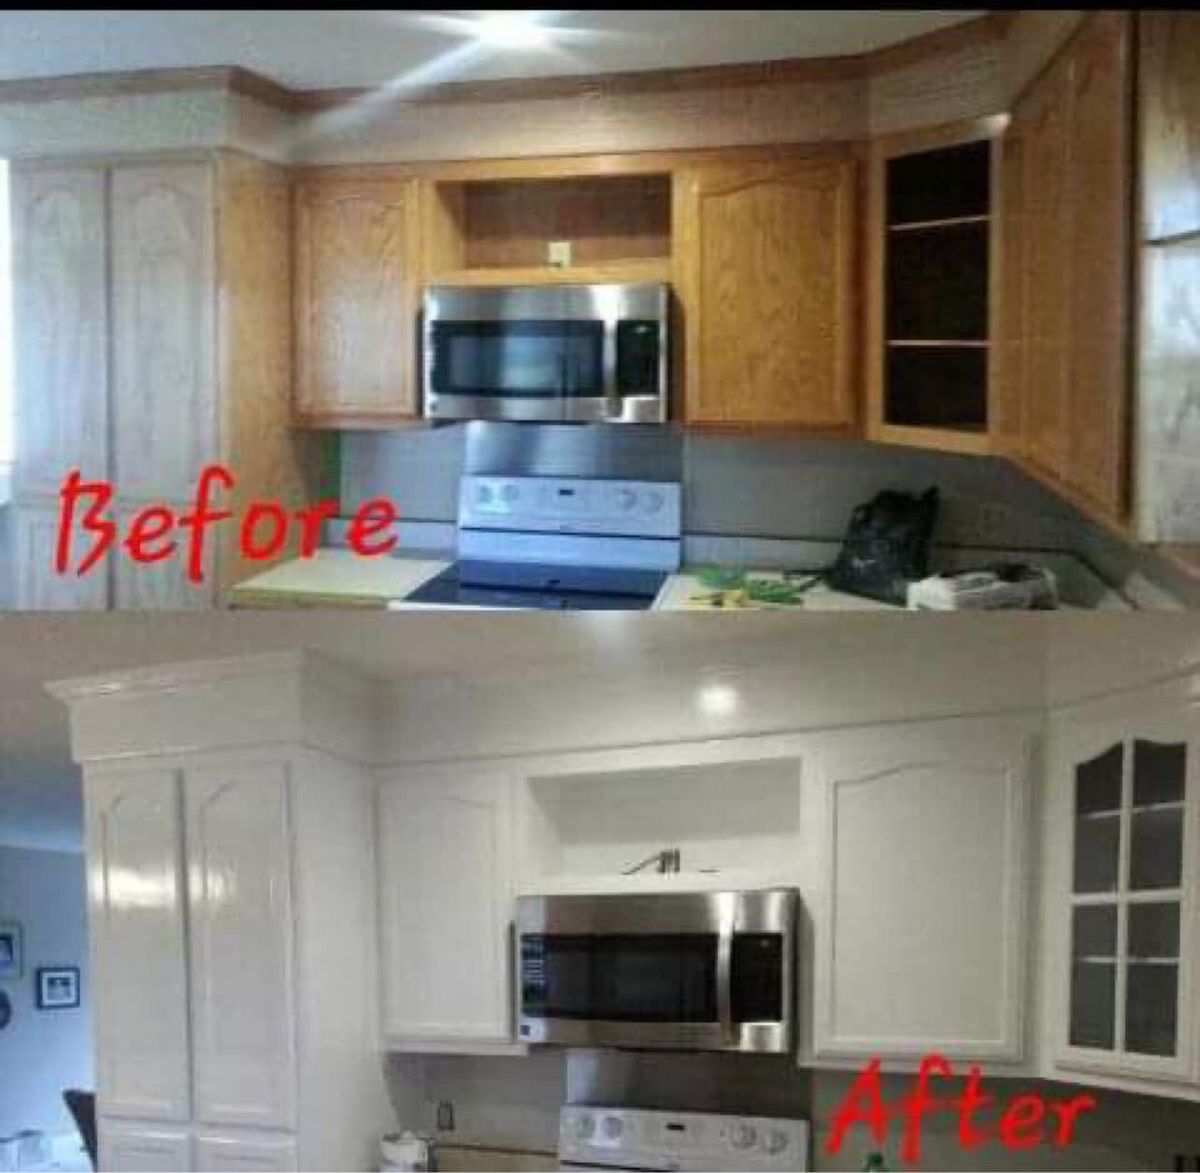 Other Services for Pomeroy Drywall & Custom Painting in Acworth, GA